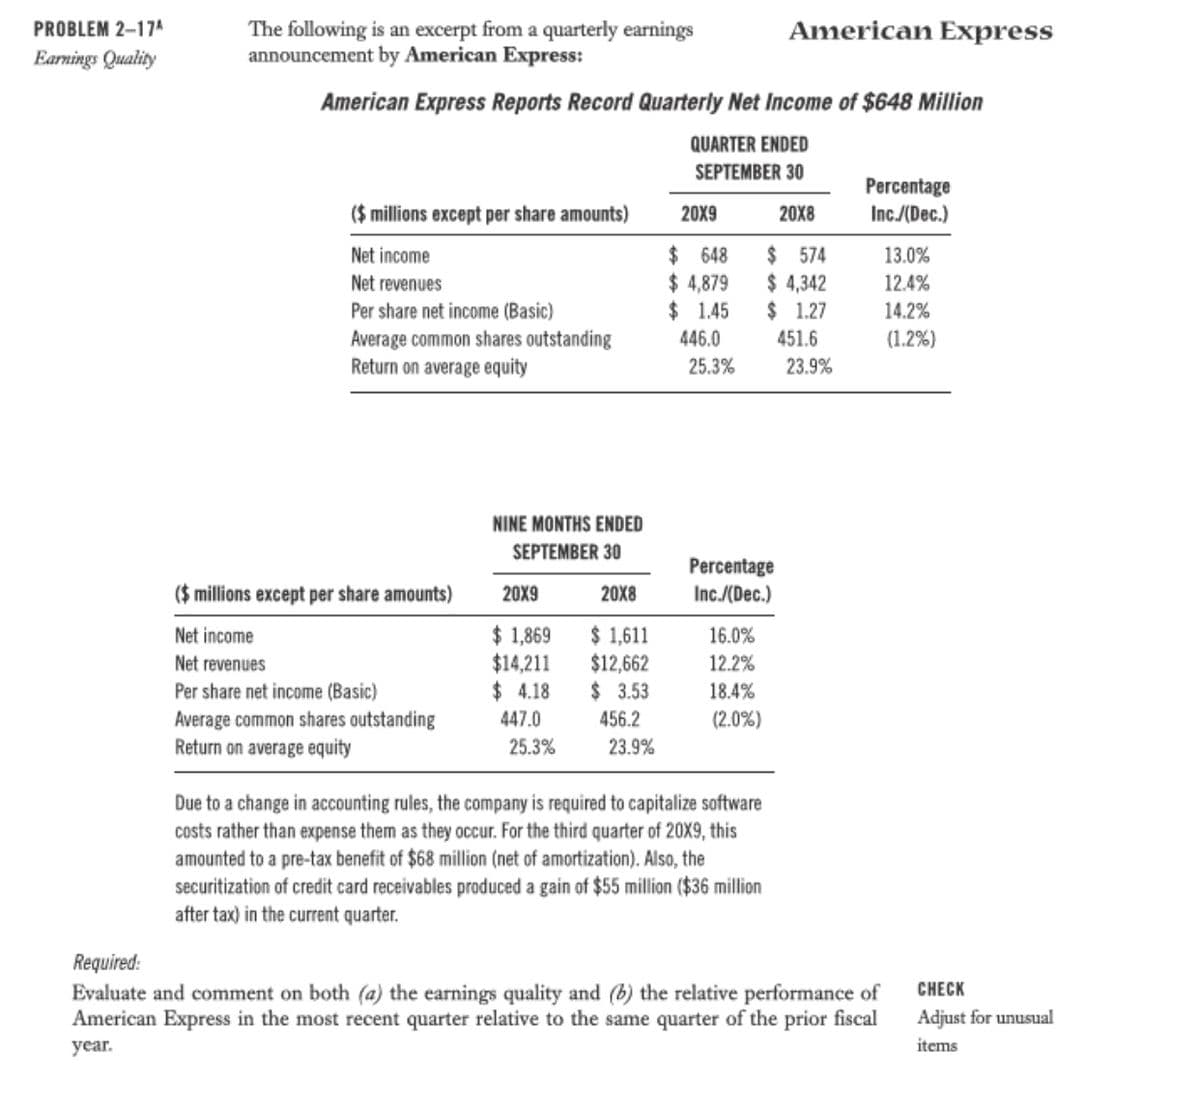 The following is an excerpt from a quarterly earnings
announcement by American Express:
PROBLEM 2–17A
American Express
Earnings Quality
American Express Reports Record Quarterly Net Income of $648 Million
QUARTER ENDED
SEPTEMBER 30
Percentage
($ millions except per share amounts)
20X9
20X8
Inc./(Dec.)
$ 648
$ 4,879
$ 1.45
$ 574
$ 4,342
$ 1.27
13.0%
12.4%
Net income
Net revenues
Per share net income (Basic)
14.2%
451.6
(1.2%)
Average common shares outstanding
Return on average equity
446.0
25.3%
23.9%
NINE MONTHS ENDED
SEPTEMBER 30
Percentage
Inc./(Dec.)
($ millions except per share amounts)
20X9
20X8
$ 1,869
$14,211
$ 4.18
$ 1,611
$12,662
$ 3.53
456.2
Net income
16.0%
Net revenues
12.2%
Per share net income (Basic)
18.4%
Average common shares outstanding
Return on average equity
447.0
(2.0%)
25.3%
23.9%
Due to a change in accounting rules, the company is required to capitalize software
costs rather than expense them as they occur. For the third quarter of 20X9, this
amounted to a pre-tax benefit of $68 million (net of amortization). Also, the
securitization of credit card receivables produced a gain of $55 million ($36 million
after tax) in the current quarter.
Required:
CHECK
Evaluate and comment on both (a) the earnings quality and (b) the relative performance of
American Express in the most recent quarter relative to the same quarter of the prior fiscal
Adjust for unusual
year.
items
